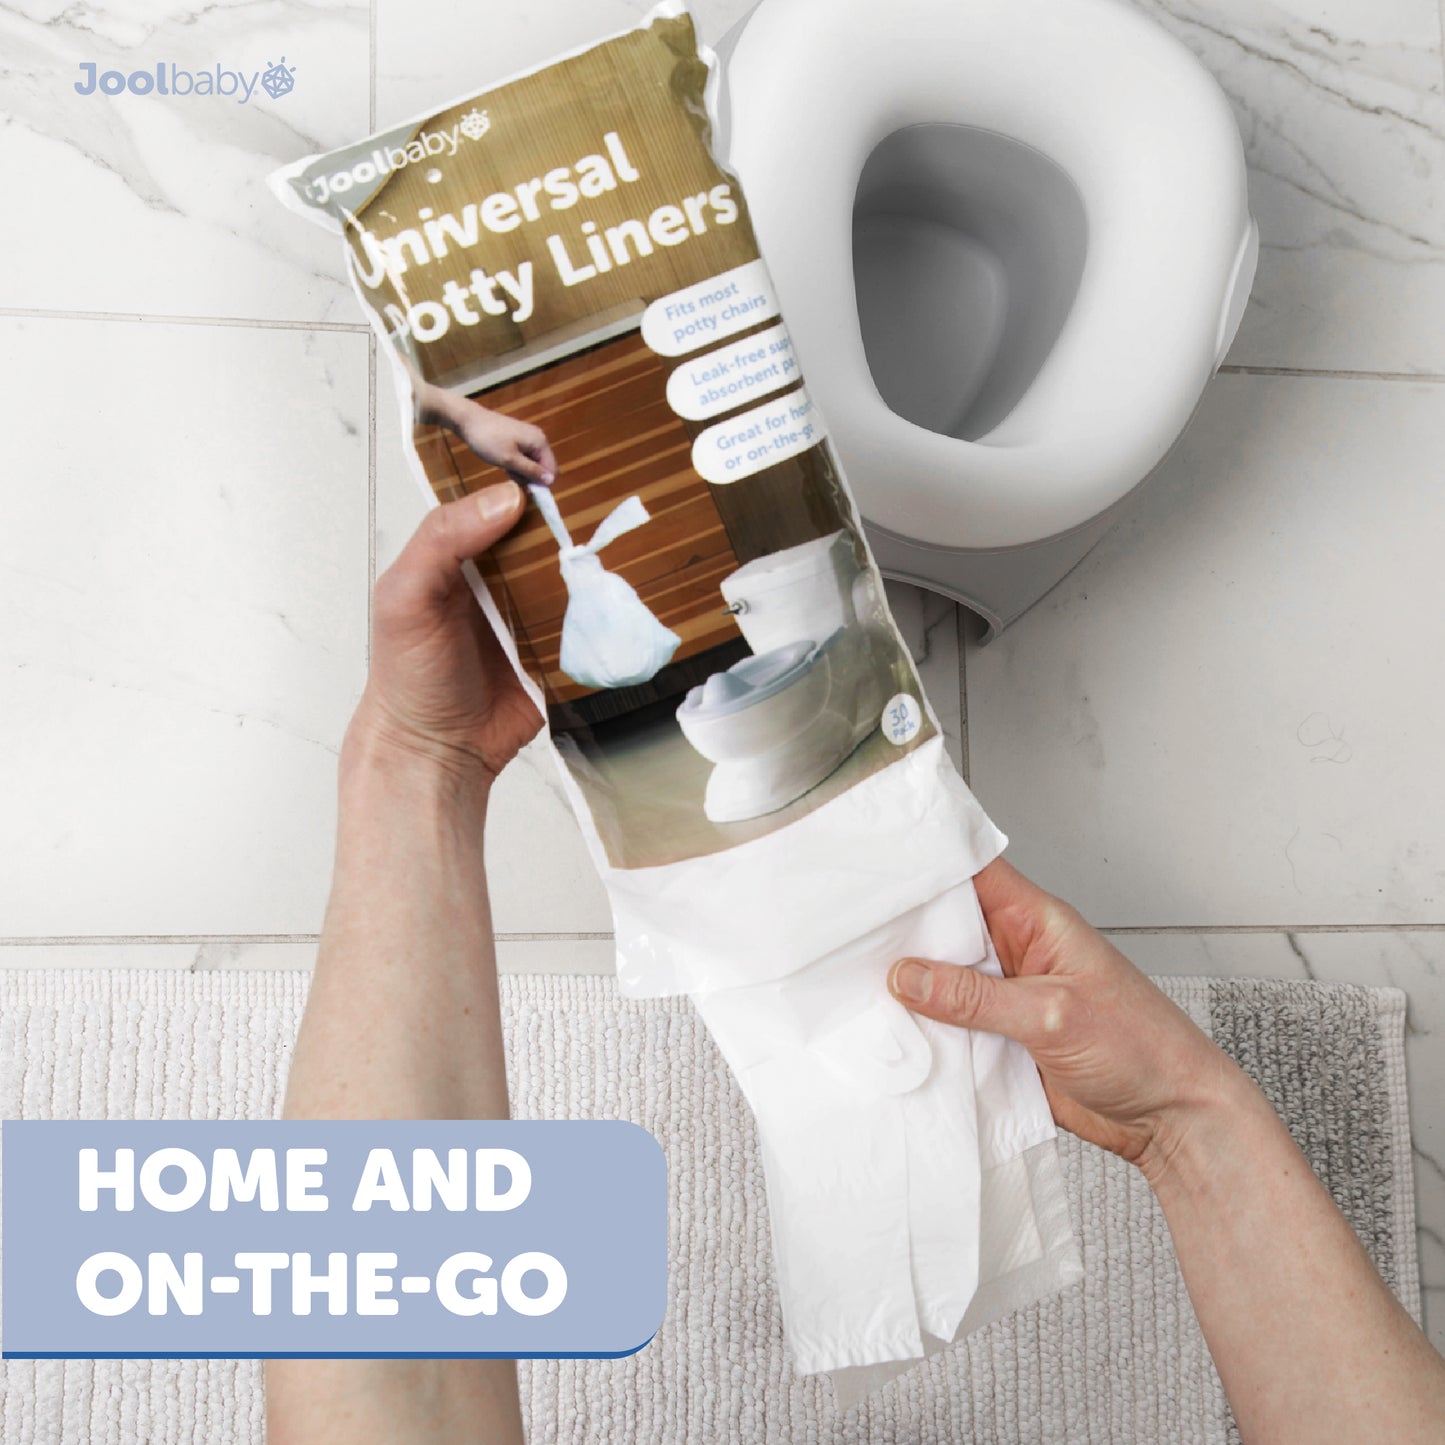 Potty Liners